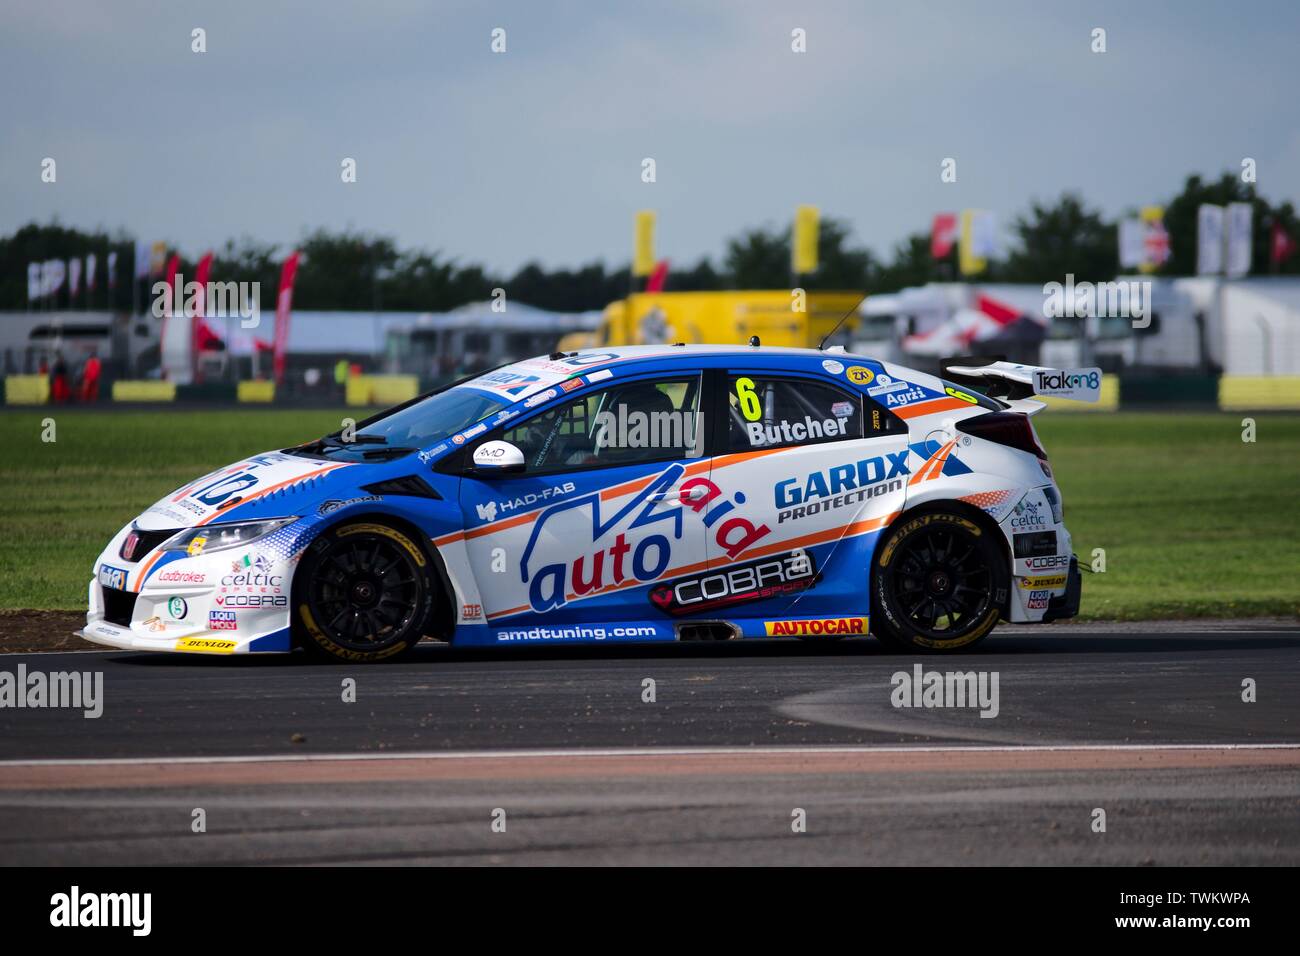 Dalton on Tees, England, 15 June 2019. Mark Blundell driving an Audi S3 Saloon for TradePriceCars.com during free practice for the Kwik Fit British Touring Car Championship at Croft Racing Circuit. Stock Photo